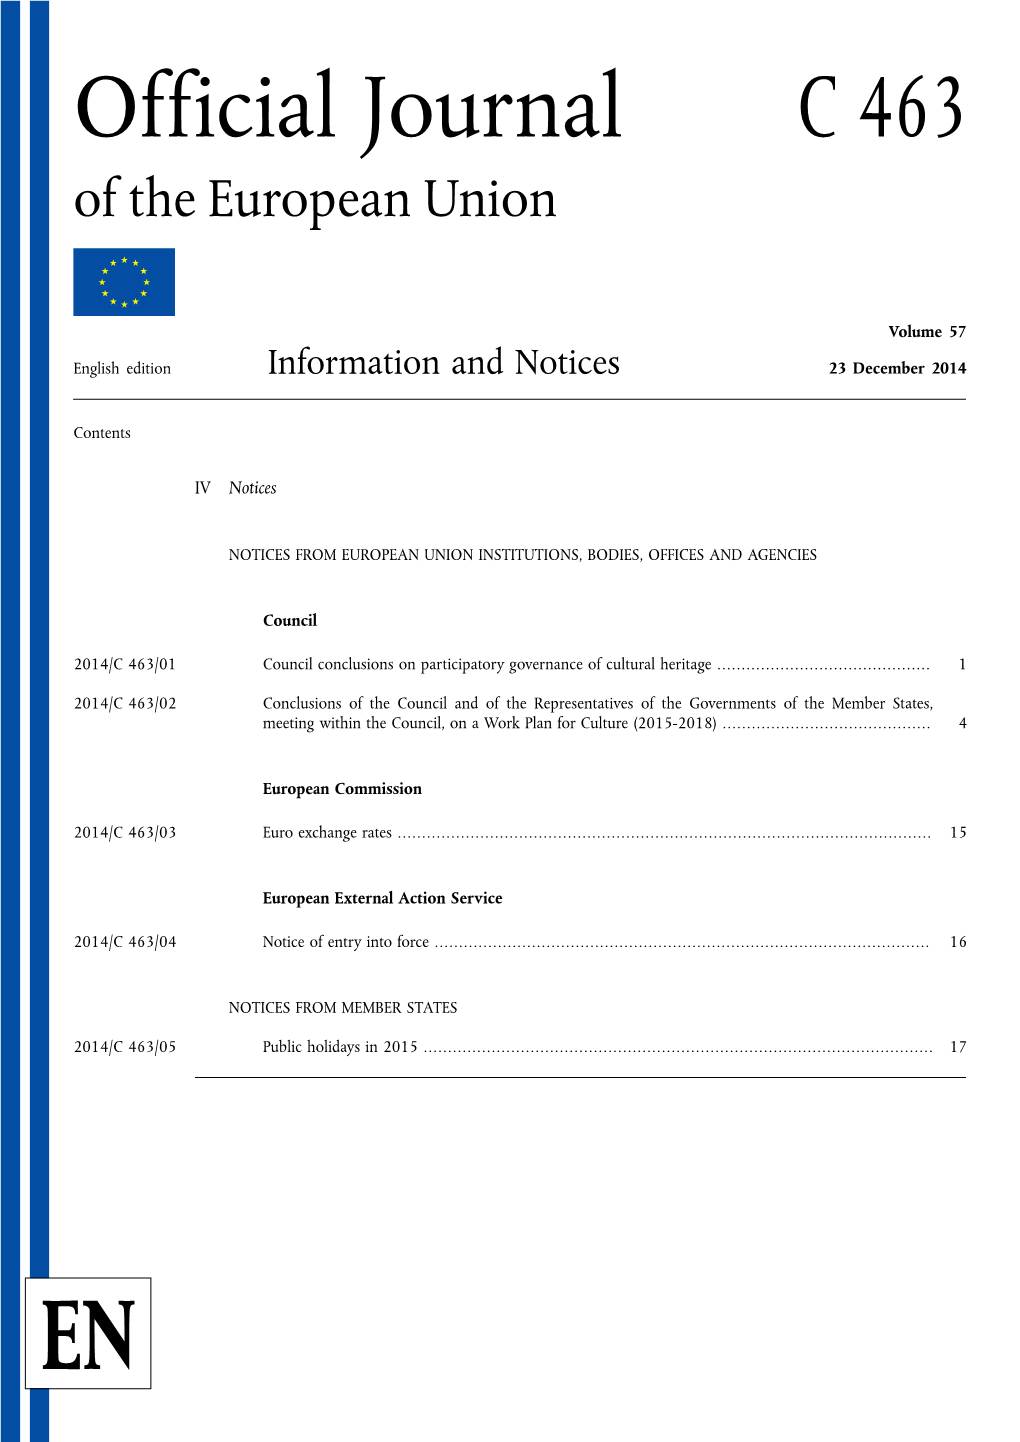 Official Journal C 463 of the European Union